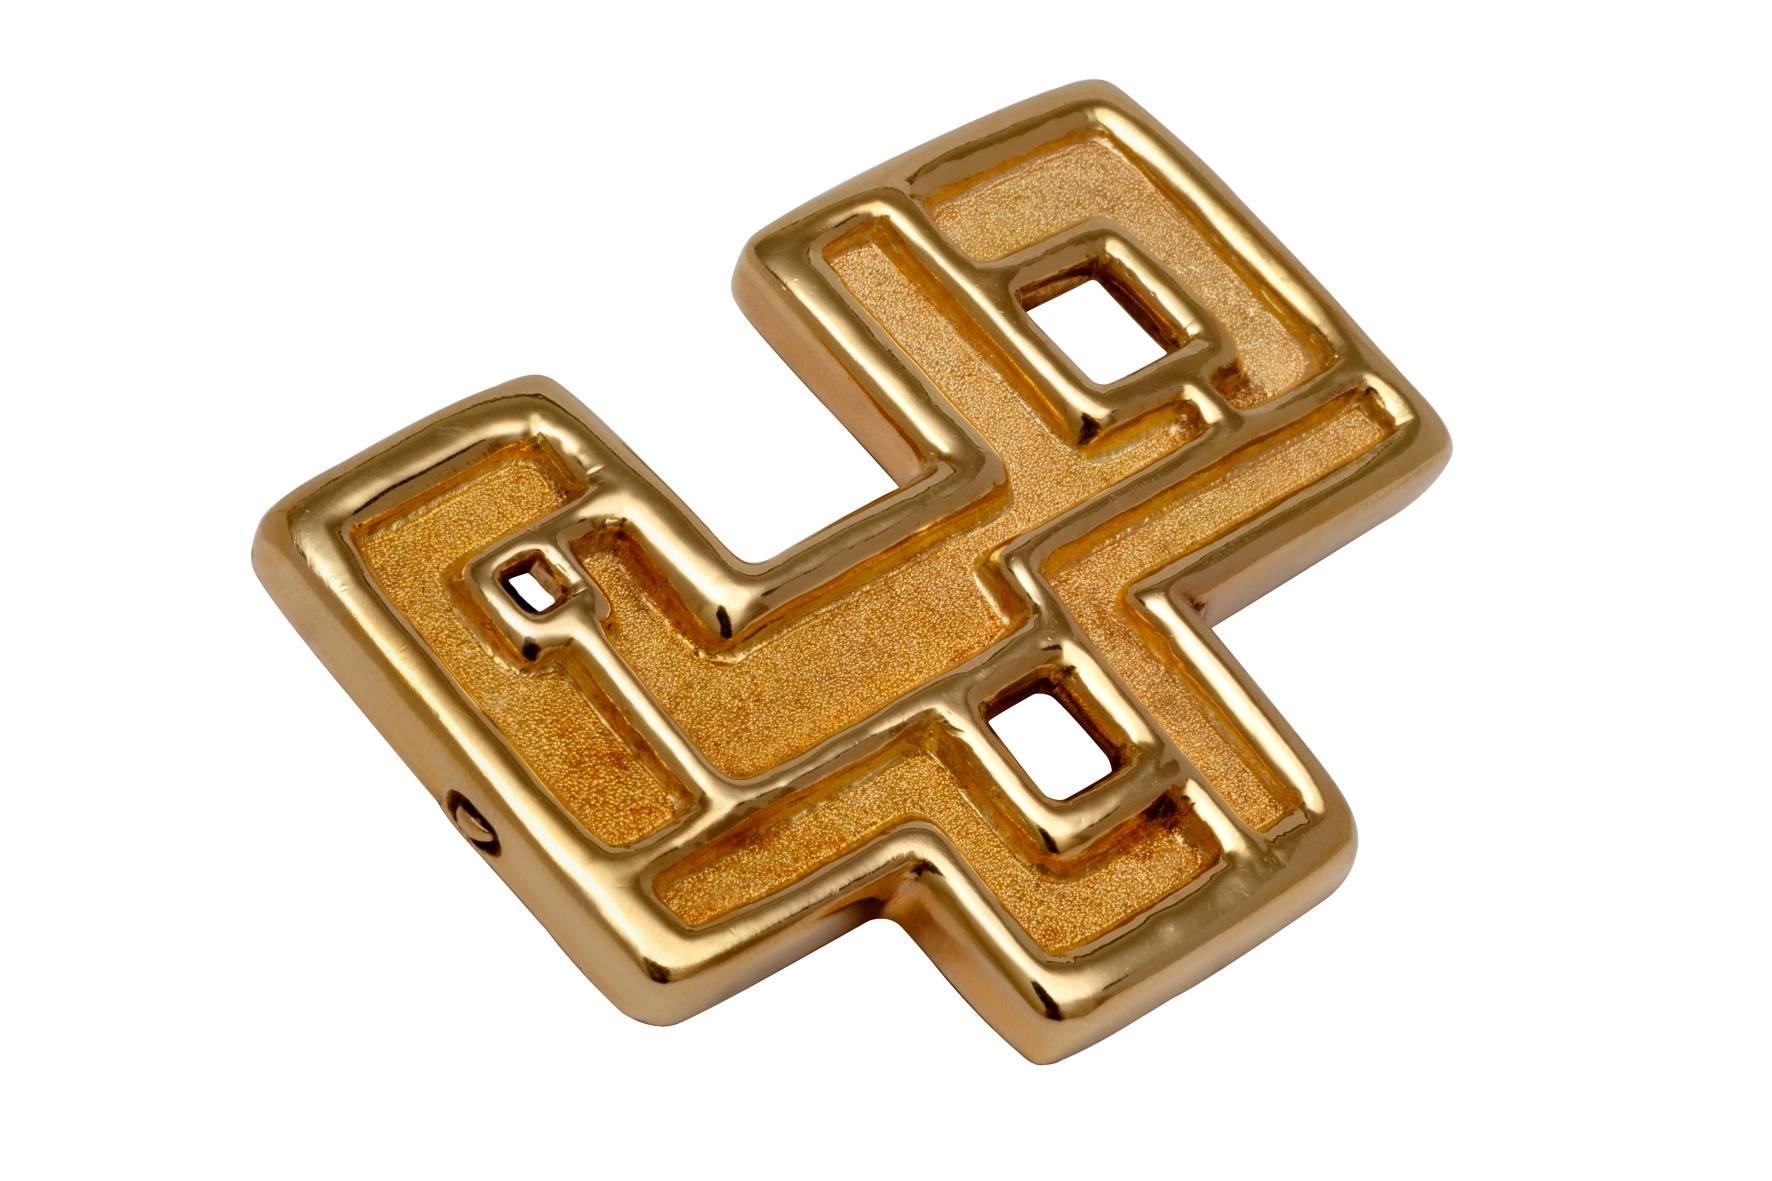 A modernist Gold brooch designed by the famous brazilian garden designer Roberto Burle Marx
Size: 5.7 x 2.8 cm
Signed Burle Marx

Haroldo Burle Marx was one of the greatest brazilian jewelry designer between the 60s and 80s.His handcrafted jewels